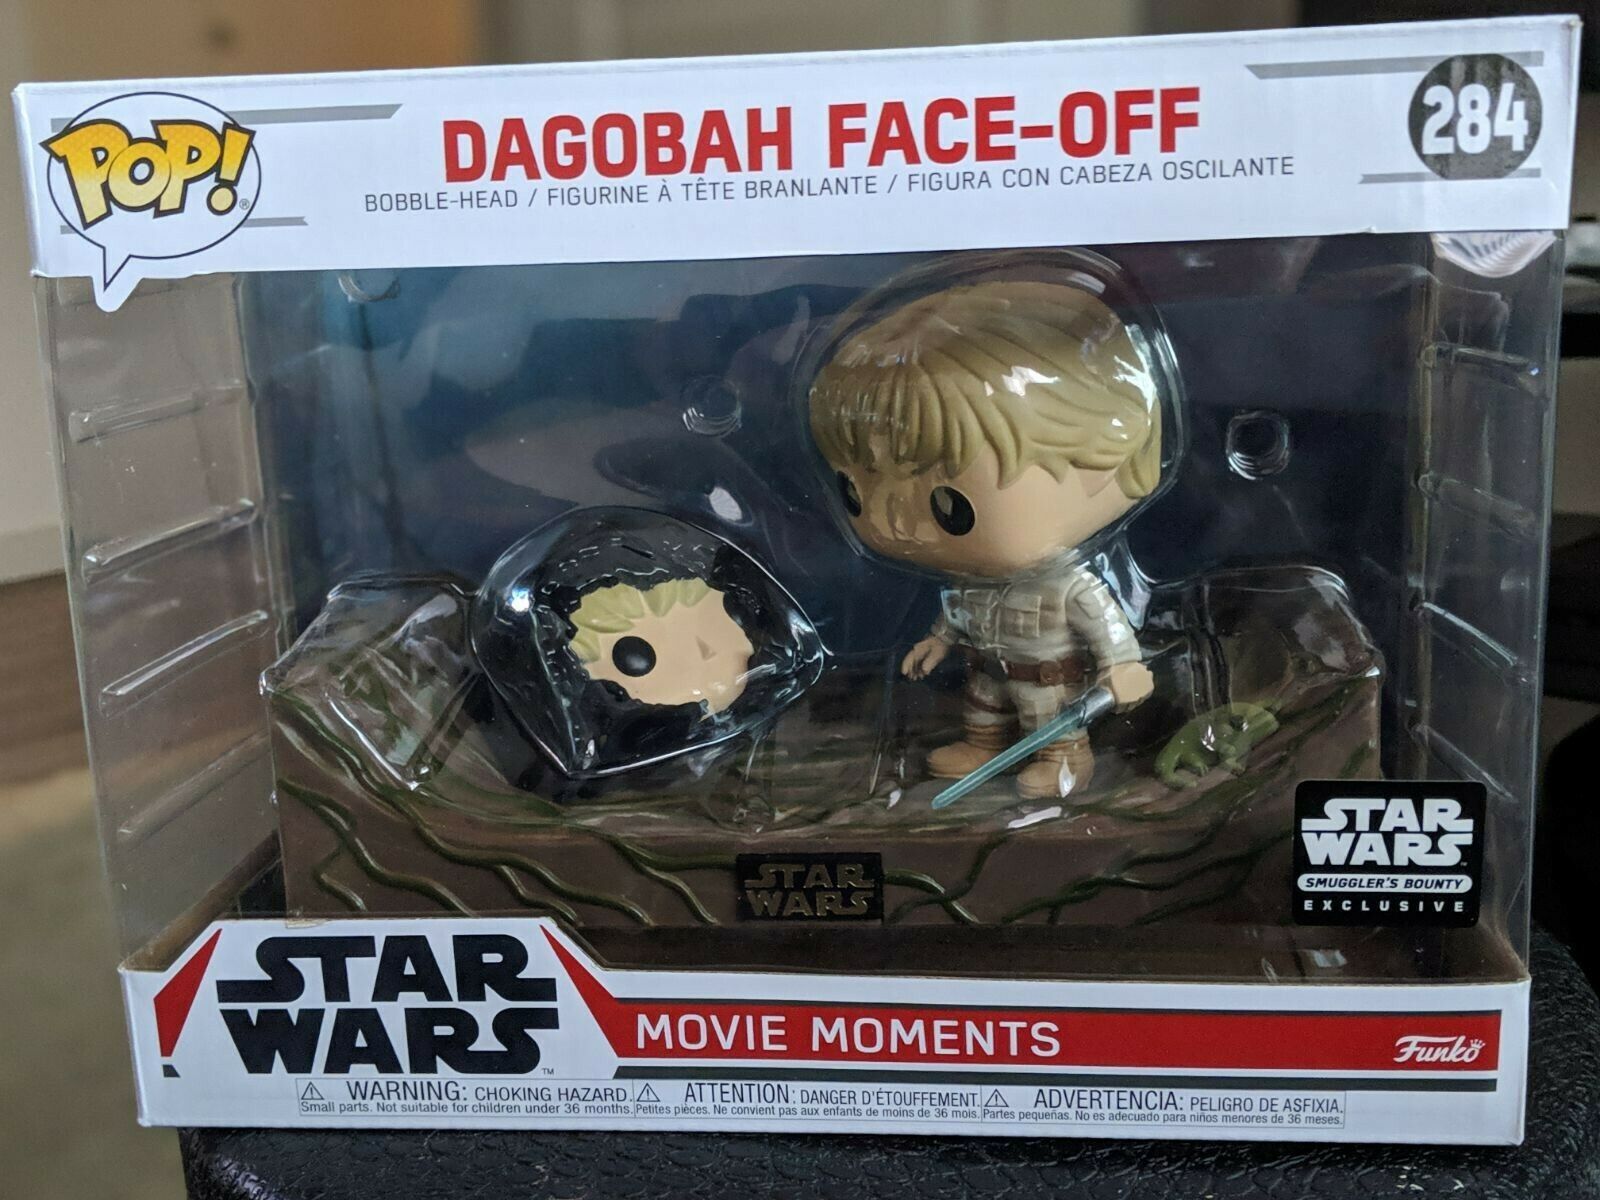 Dagobah Face-Off (Movie Moments) 284 - Smuggler's Bounty Exclusive [Da